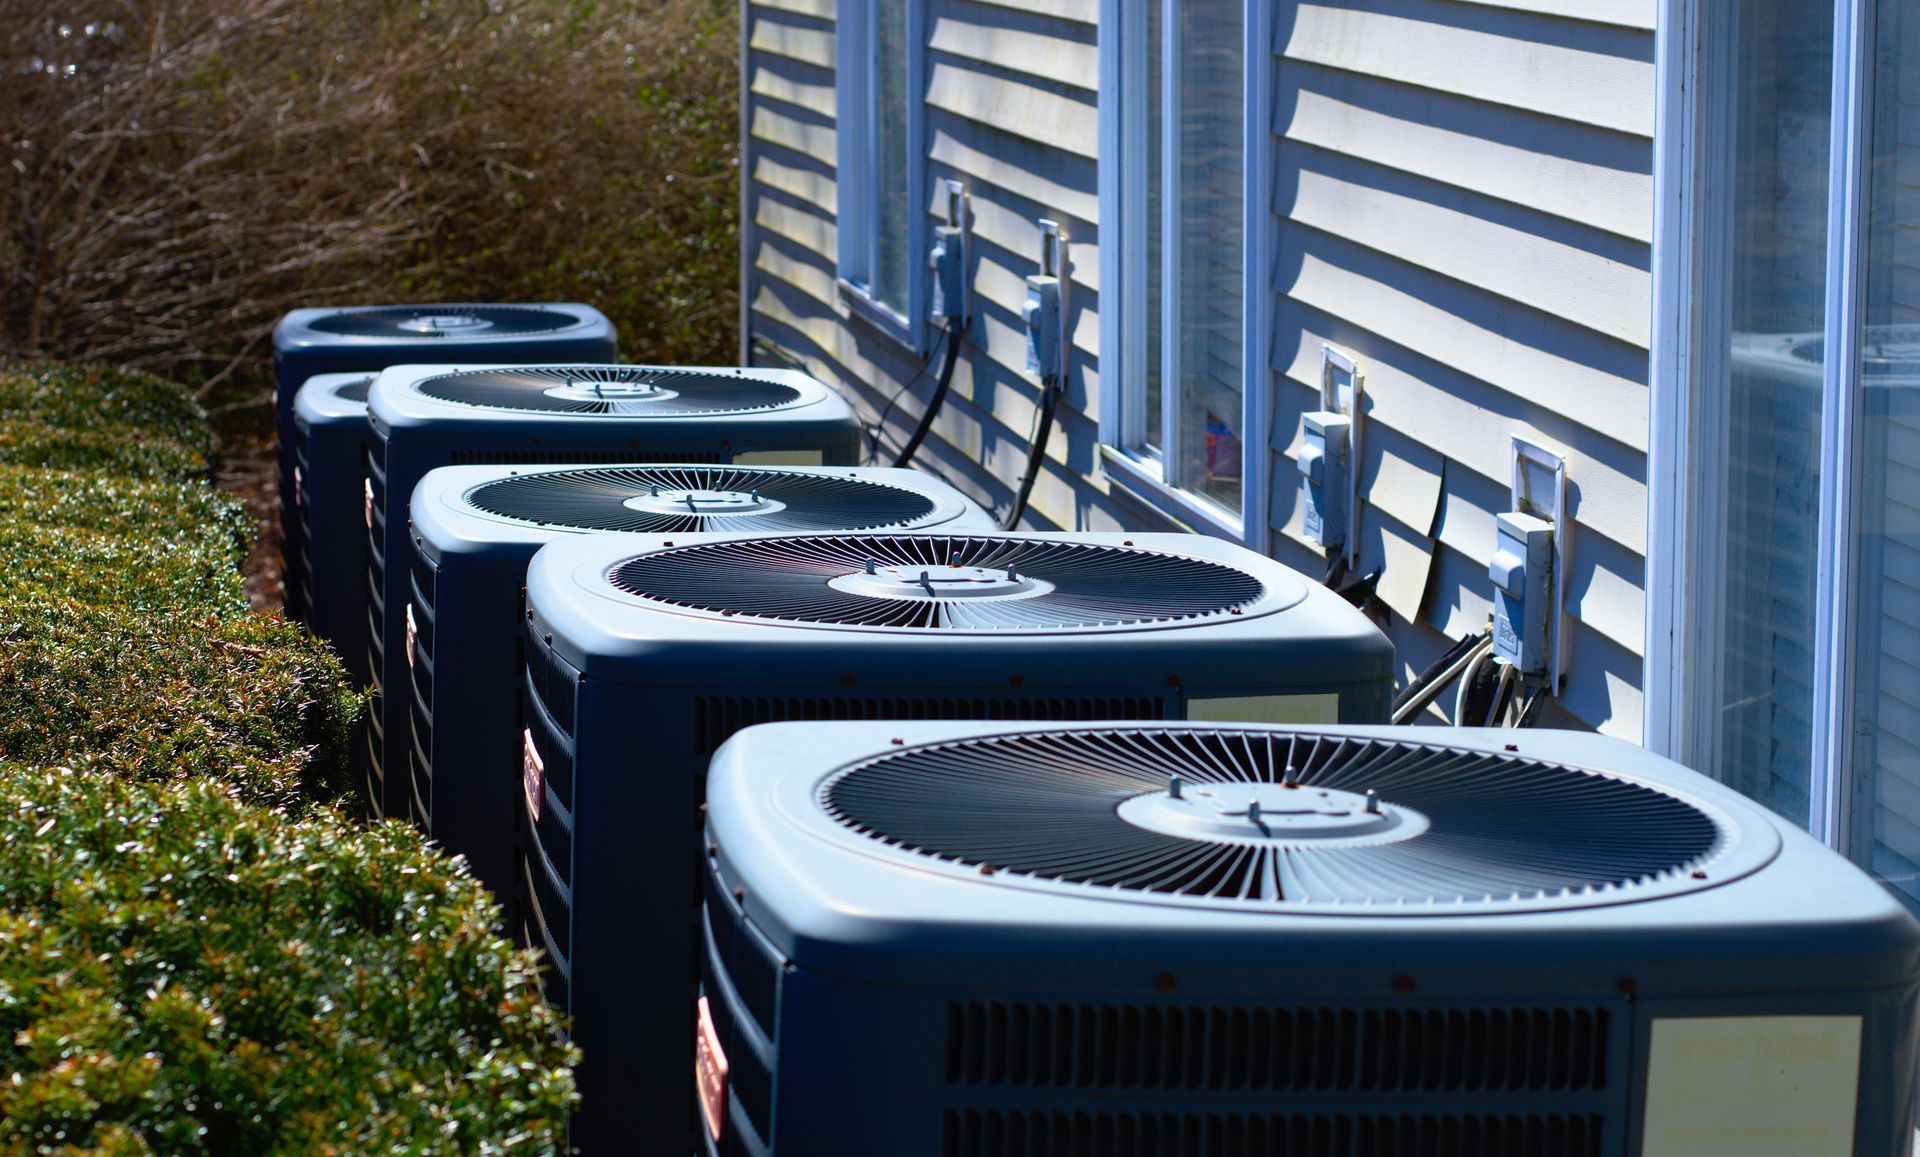 Residential HVAC units outside building